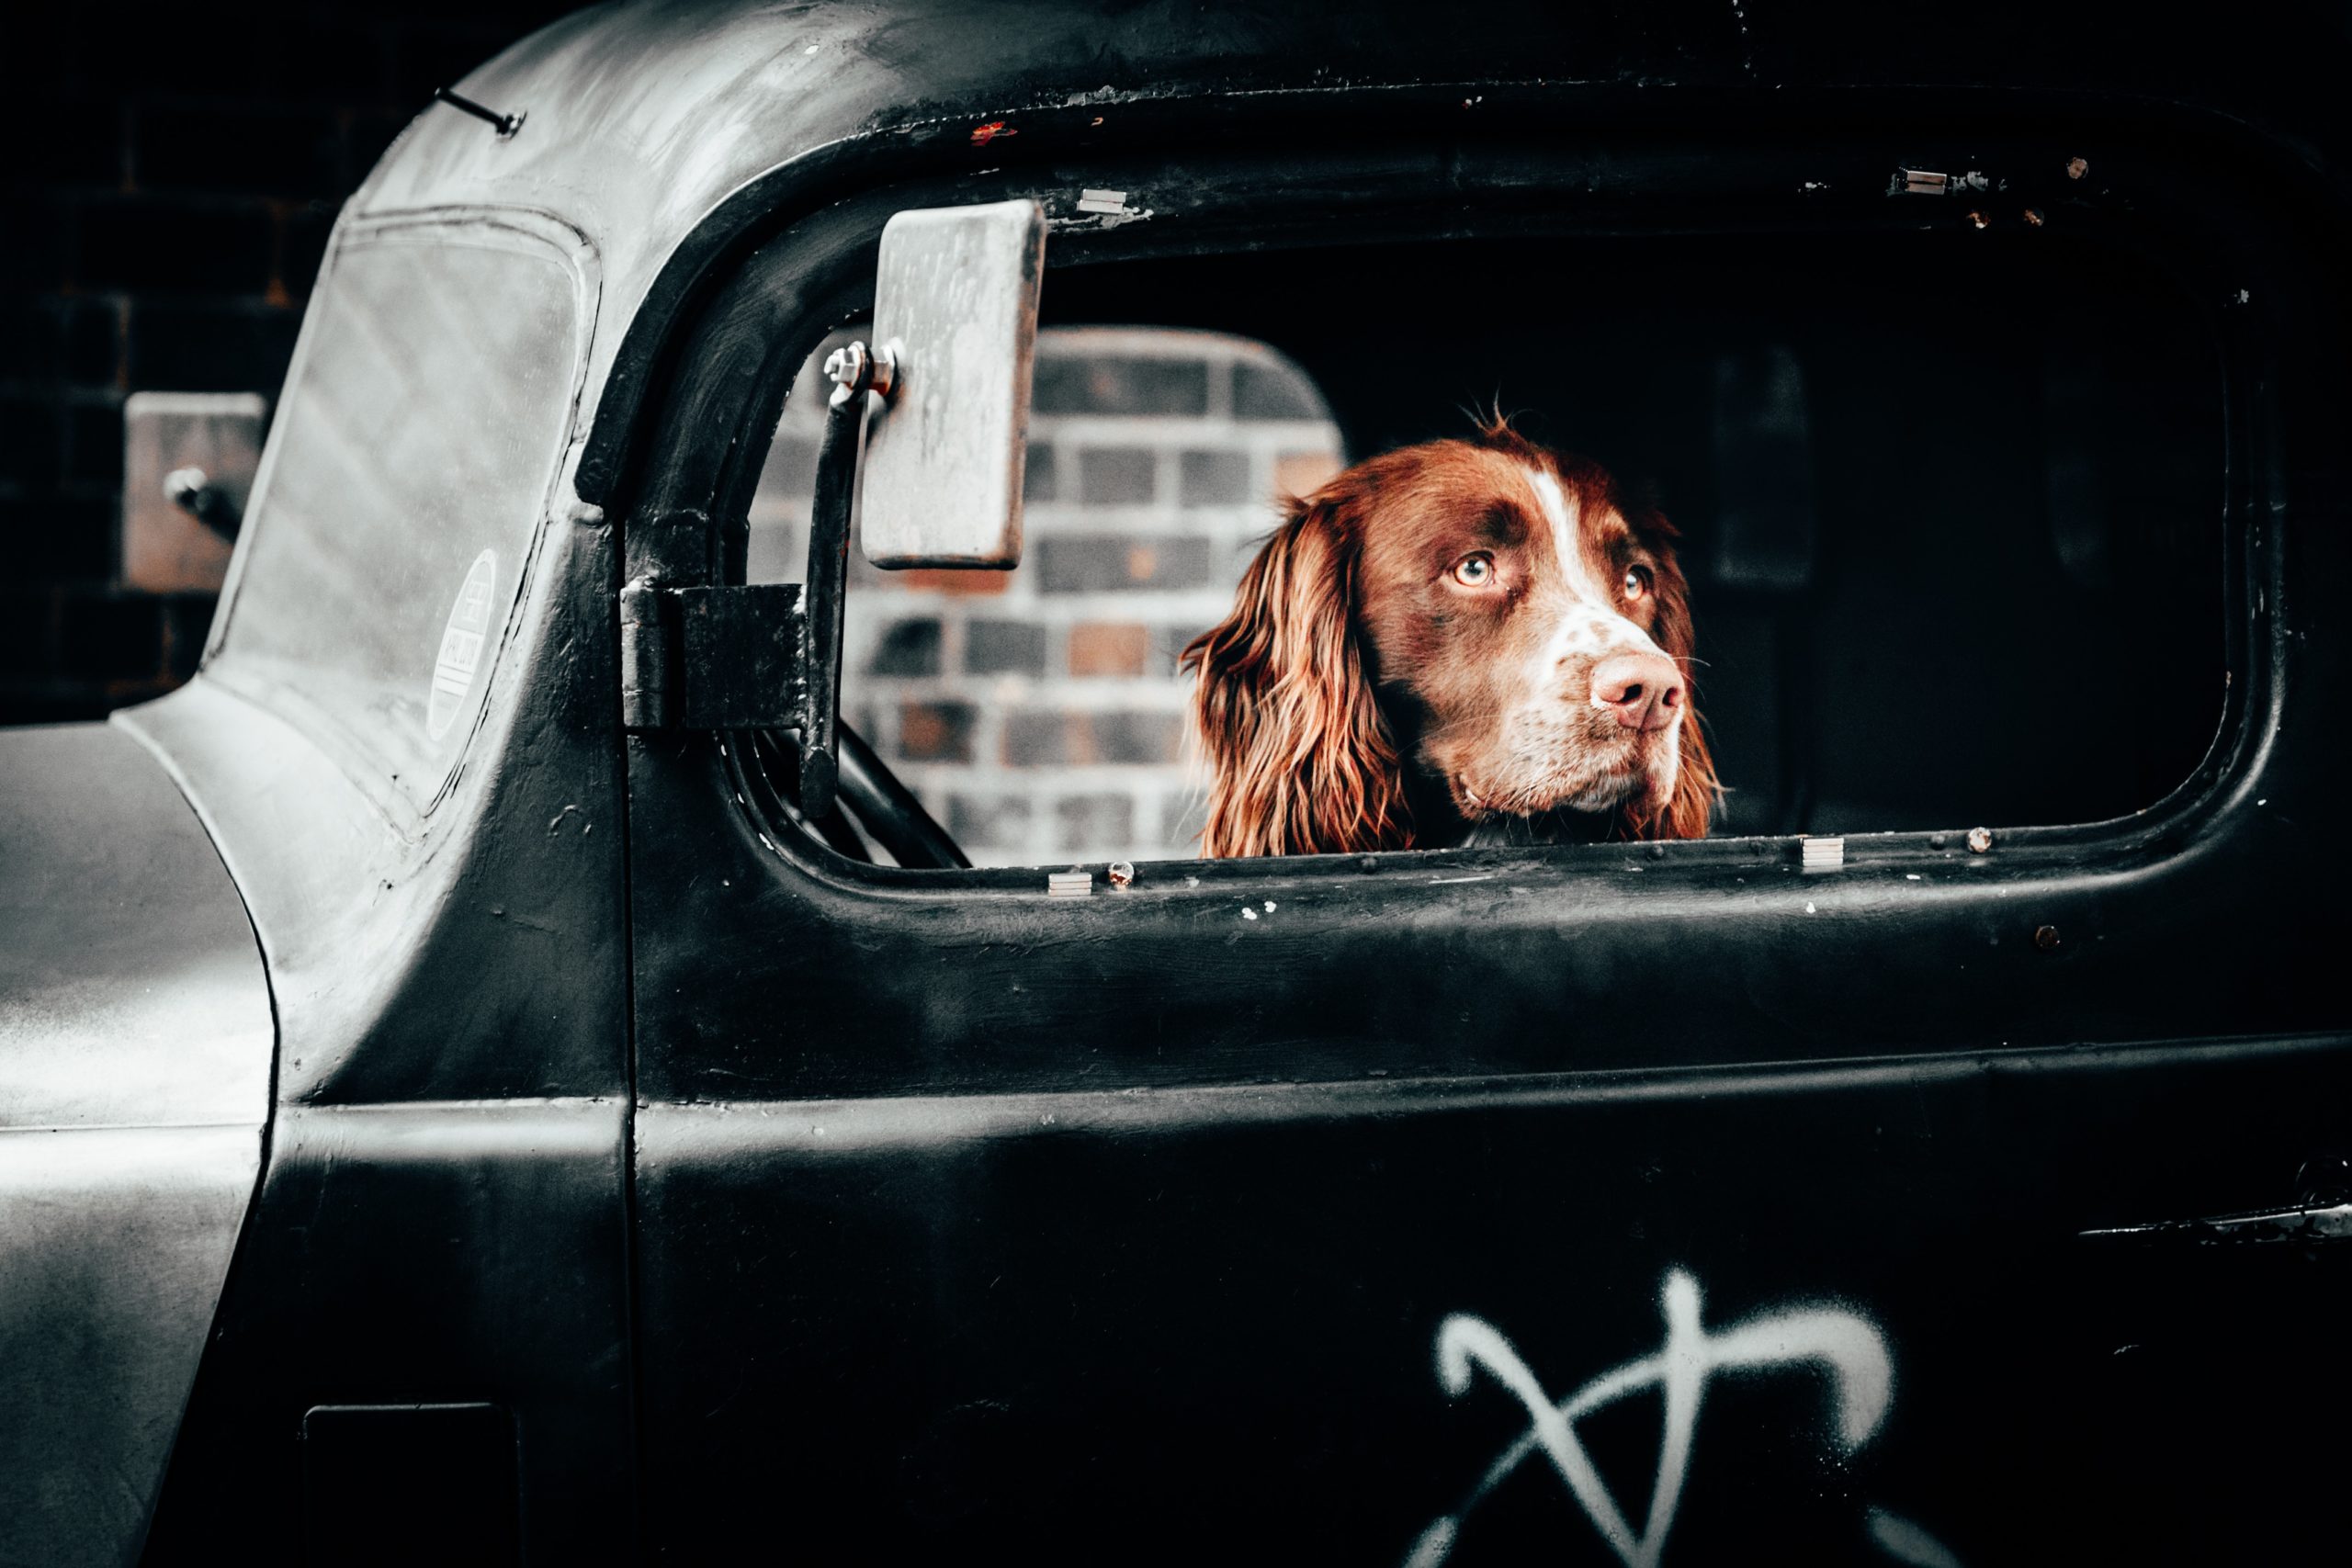 Spaniel in Black Cab thinking about pollution